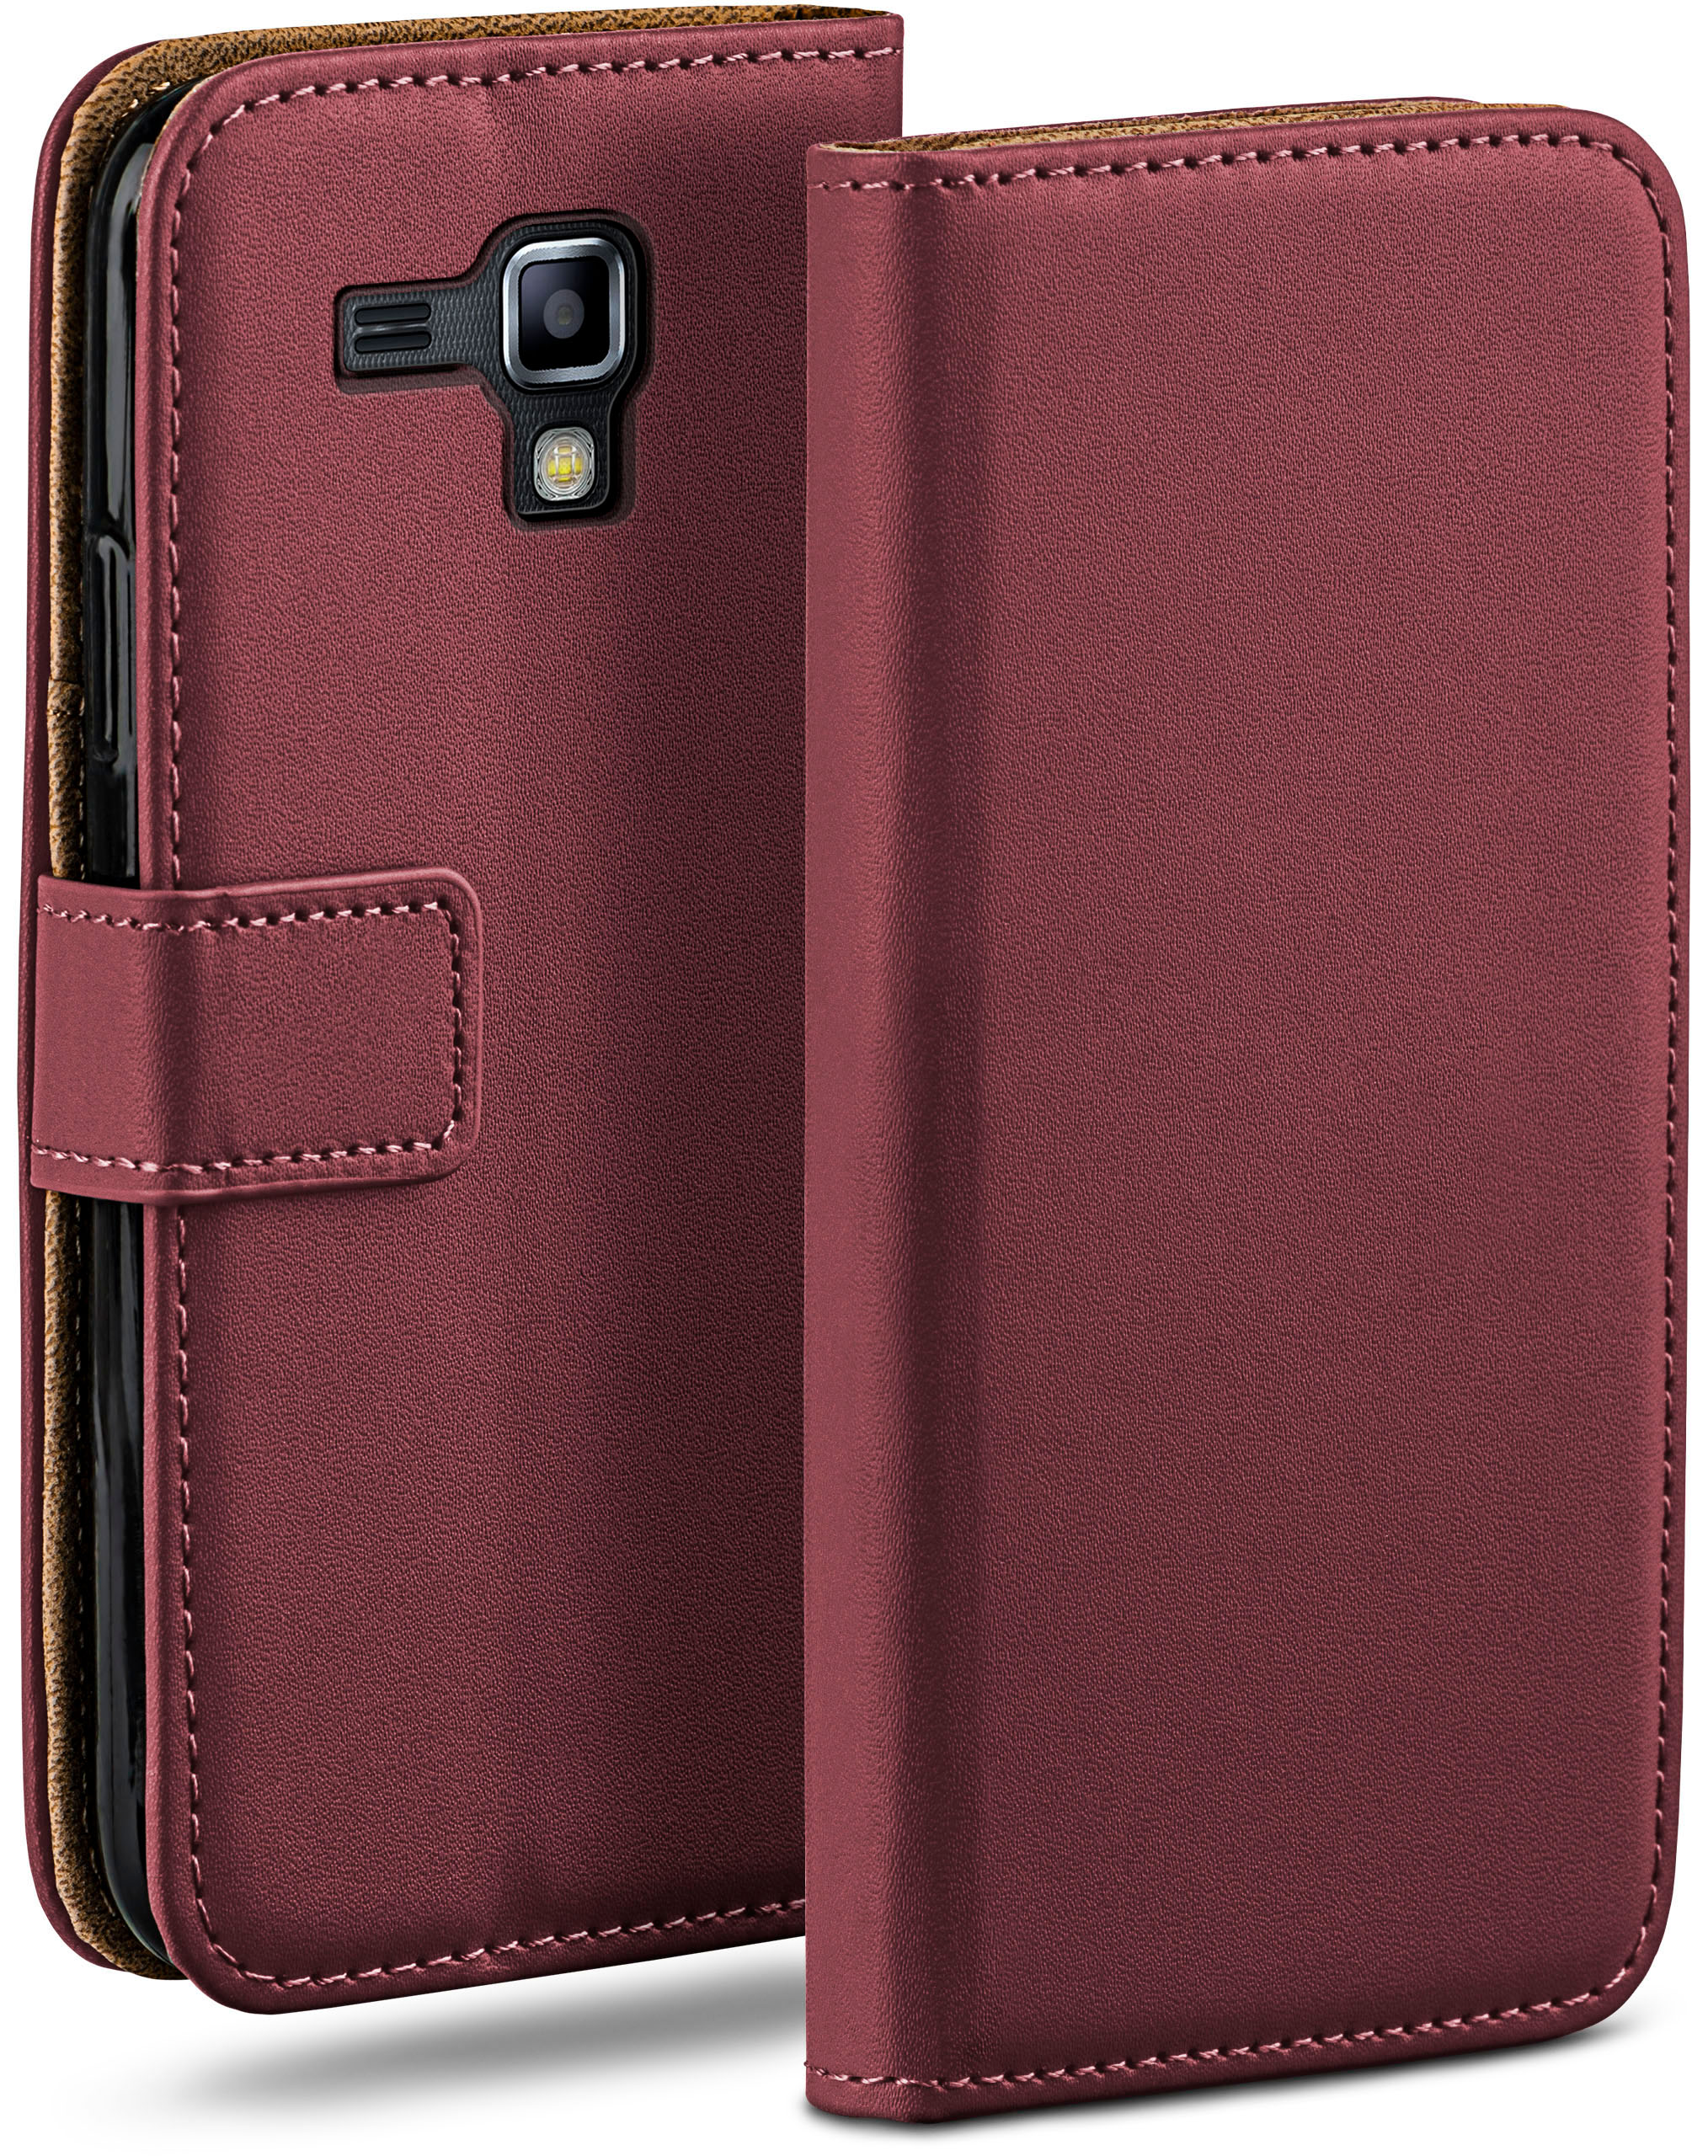 S Book Duos MOEX Bookcover, Case, 2, Galaxy Samsung, Maroon-Red